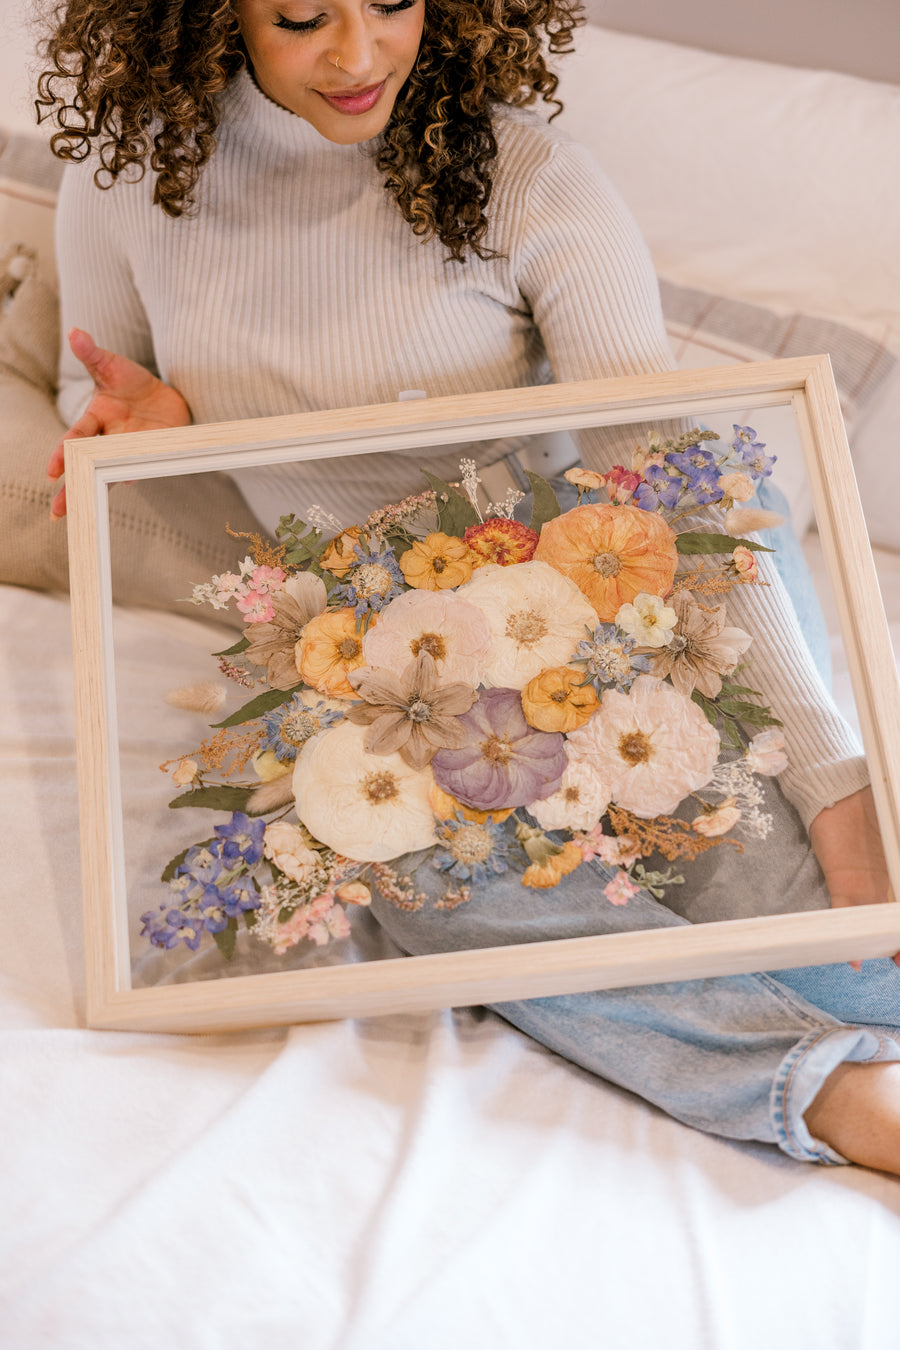 Beautiful pressed florals displayed in a floating glass frame held by a bride admiring her bouquet preservation.